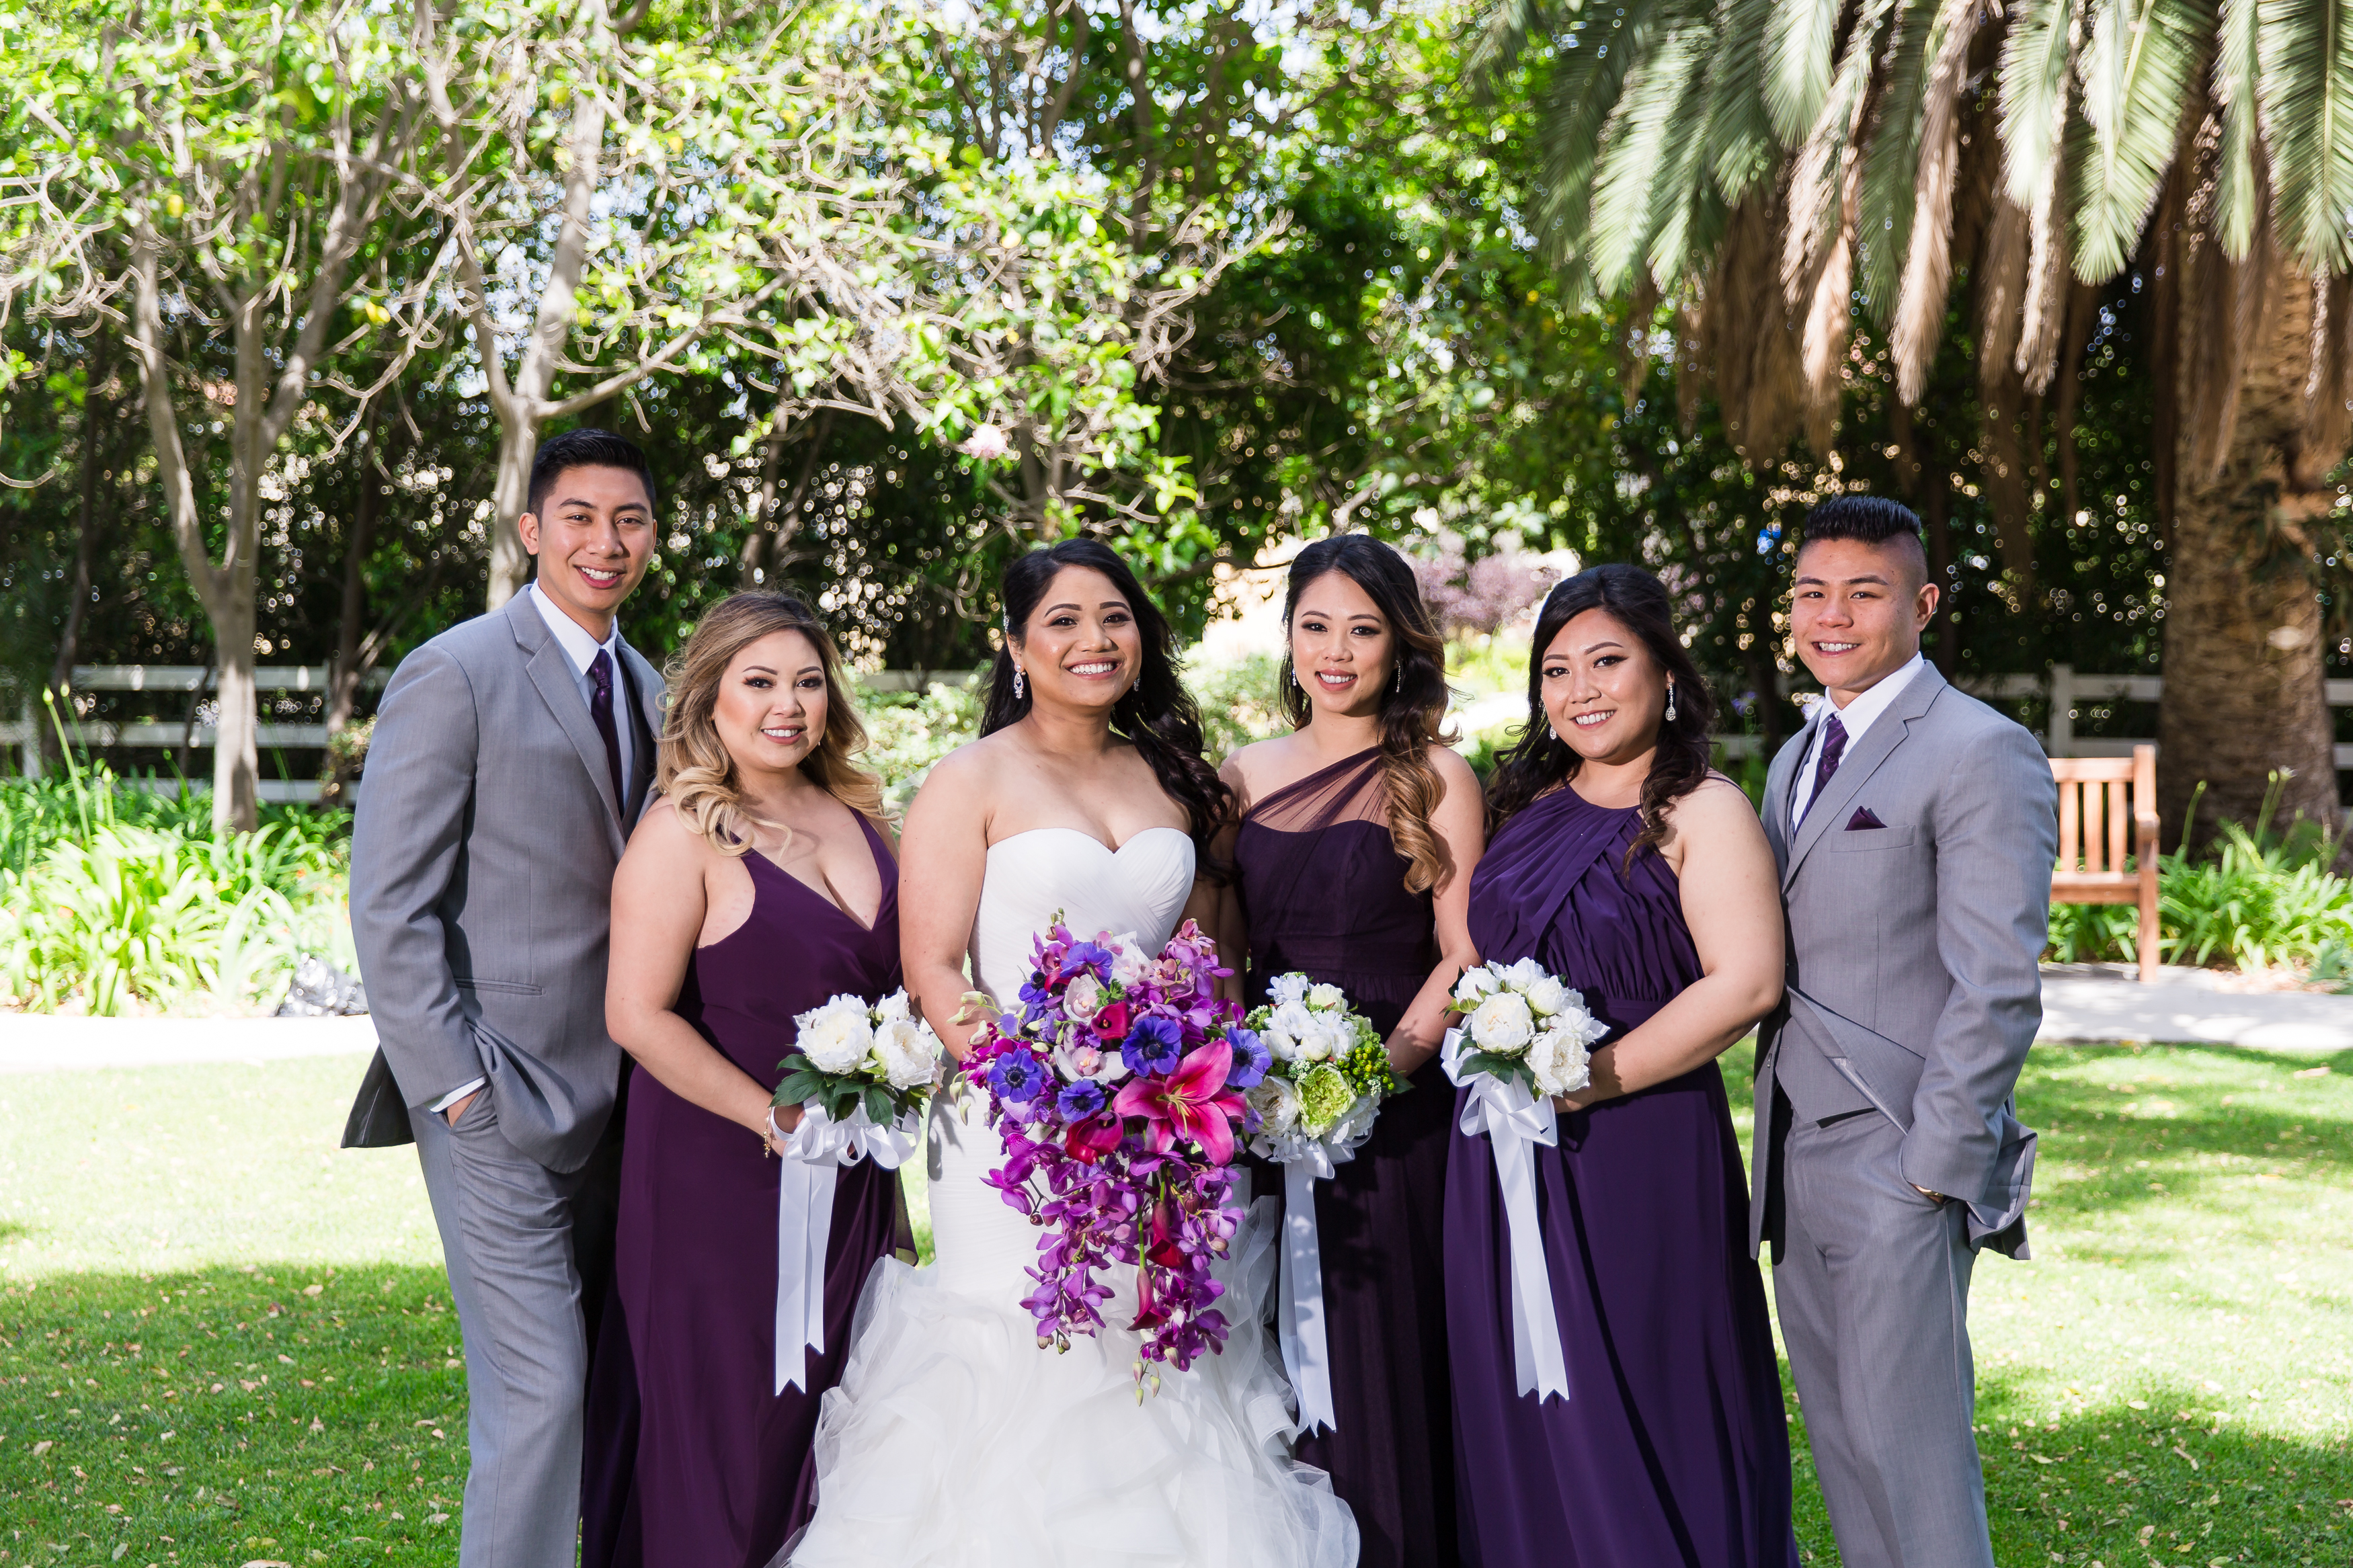 Bride and her bridal party holding wedding bouquets